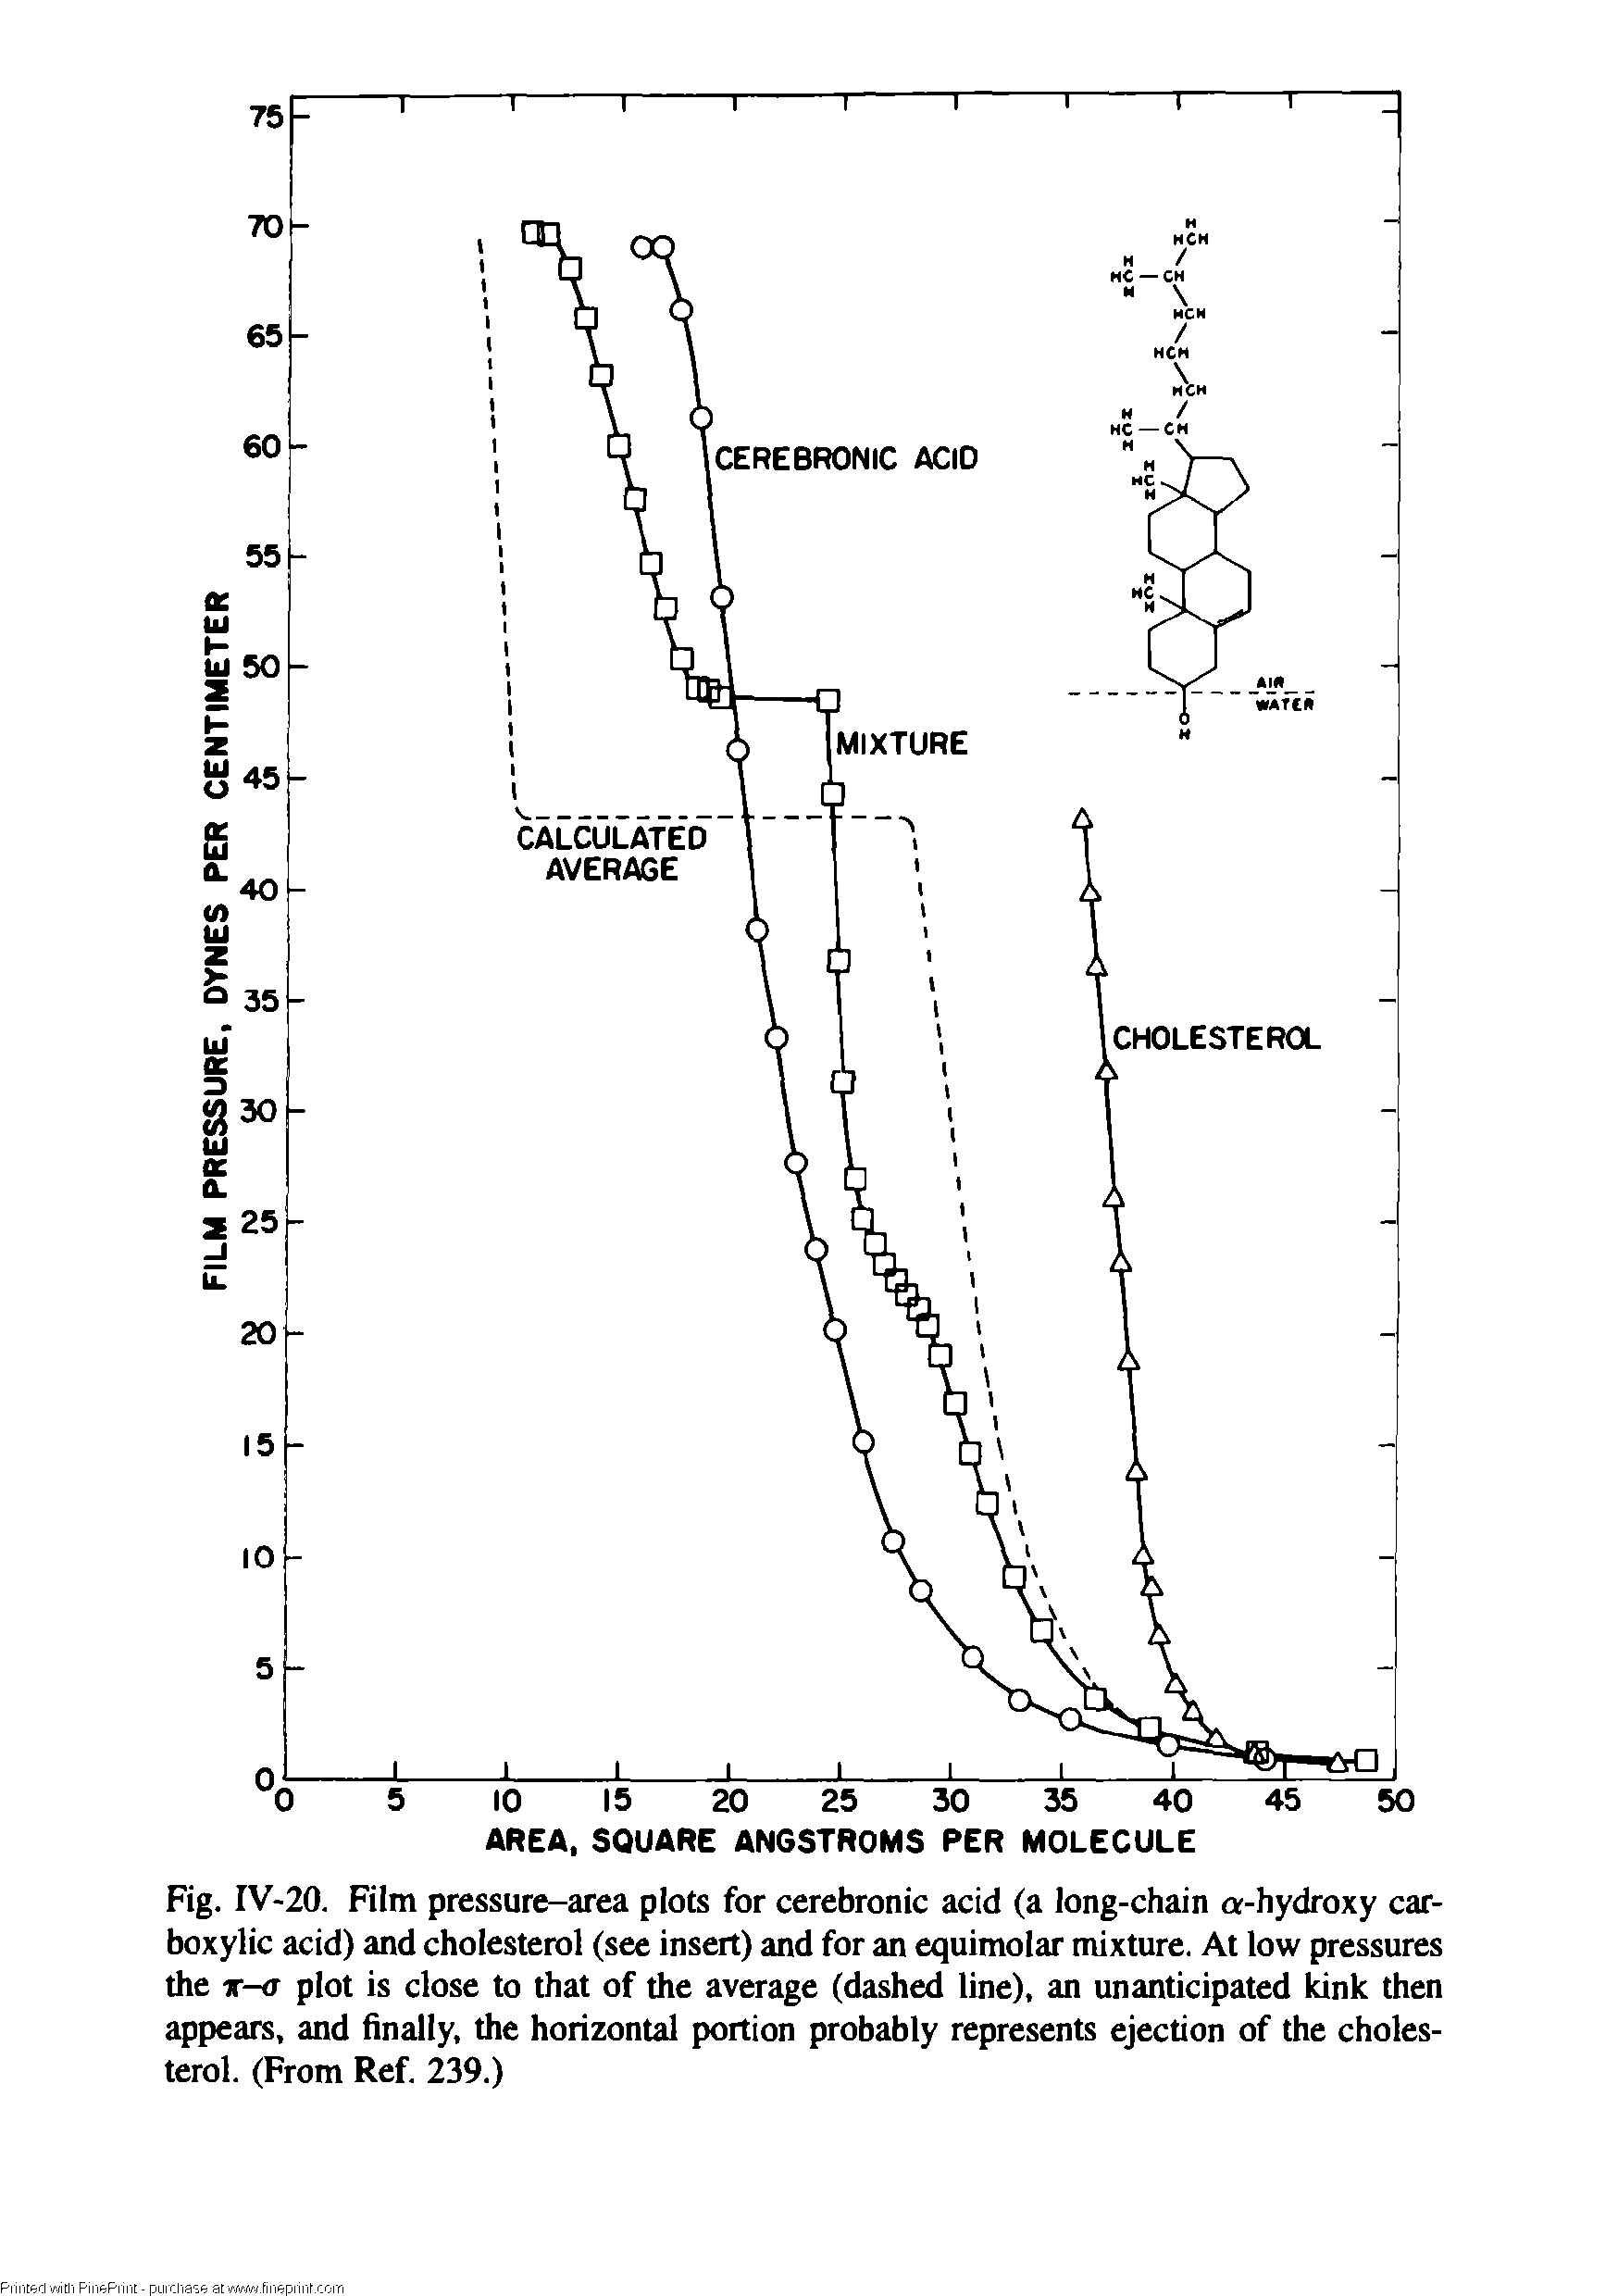 Fig. IV-20. Film pressure-area plots for cerebronic acid (a long-chain a-hydroxy carboxylic acid) and cholesterol (see insert) and for an equimolar mixture. At low pressures the r-a plot is close to that of the average (dashed line), an unanticipated kink then appears, and finally, the horizontal portion probably represents ejection of the cholesterol. (From Ref. 239.)...